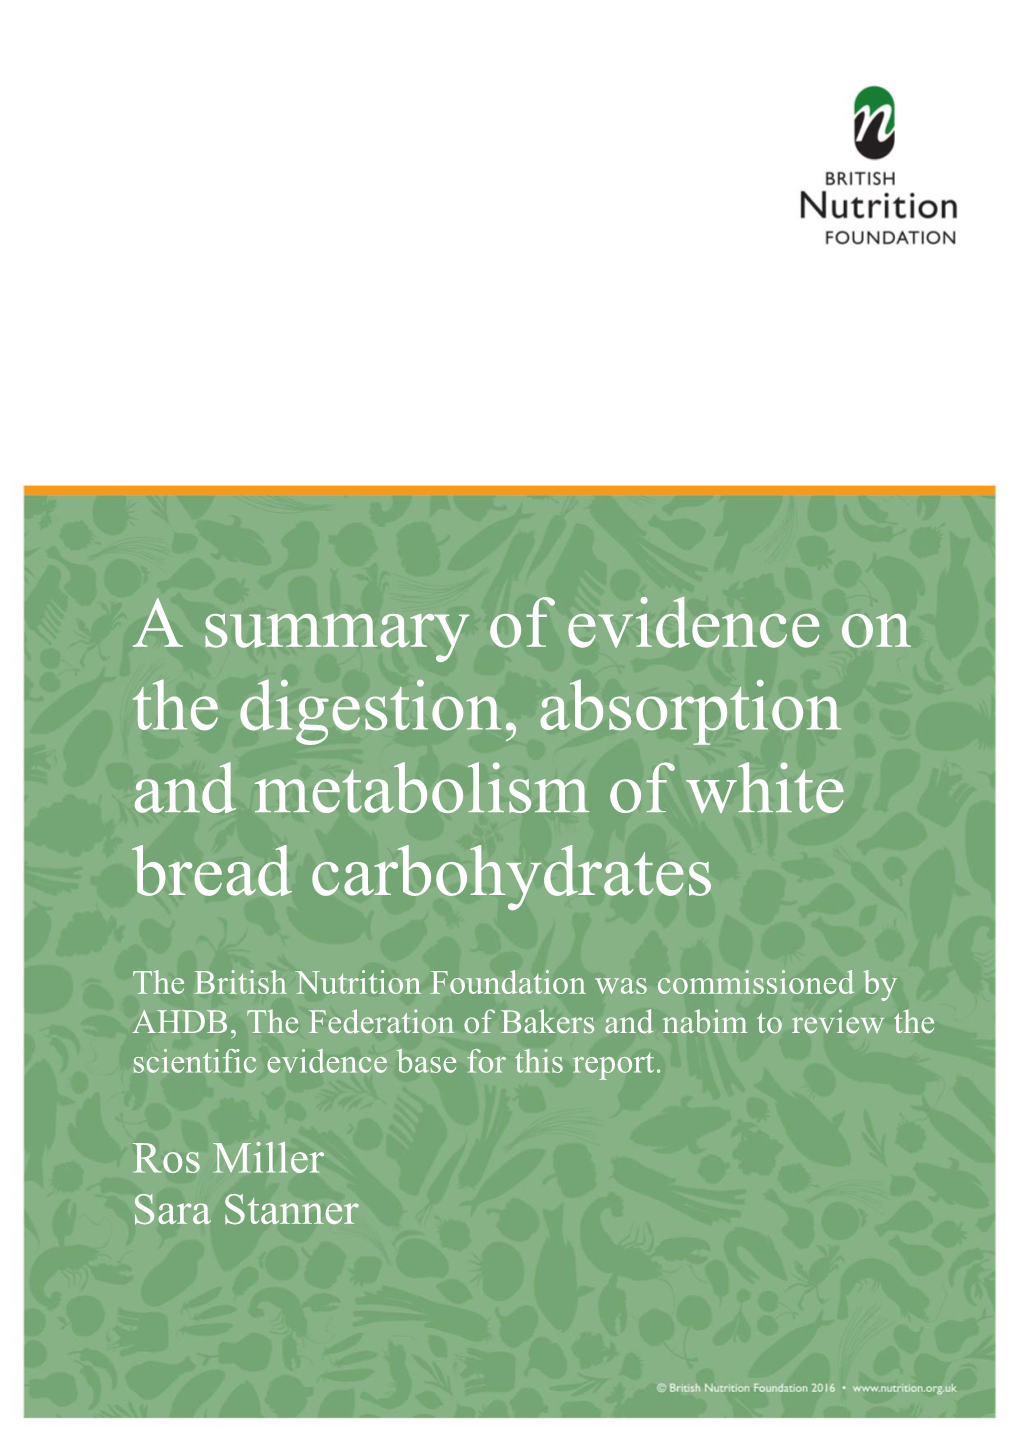 A Summary of Evidence on the Digestion, Absorption and Metabolism of White Bread Carbohydrates